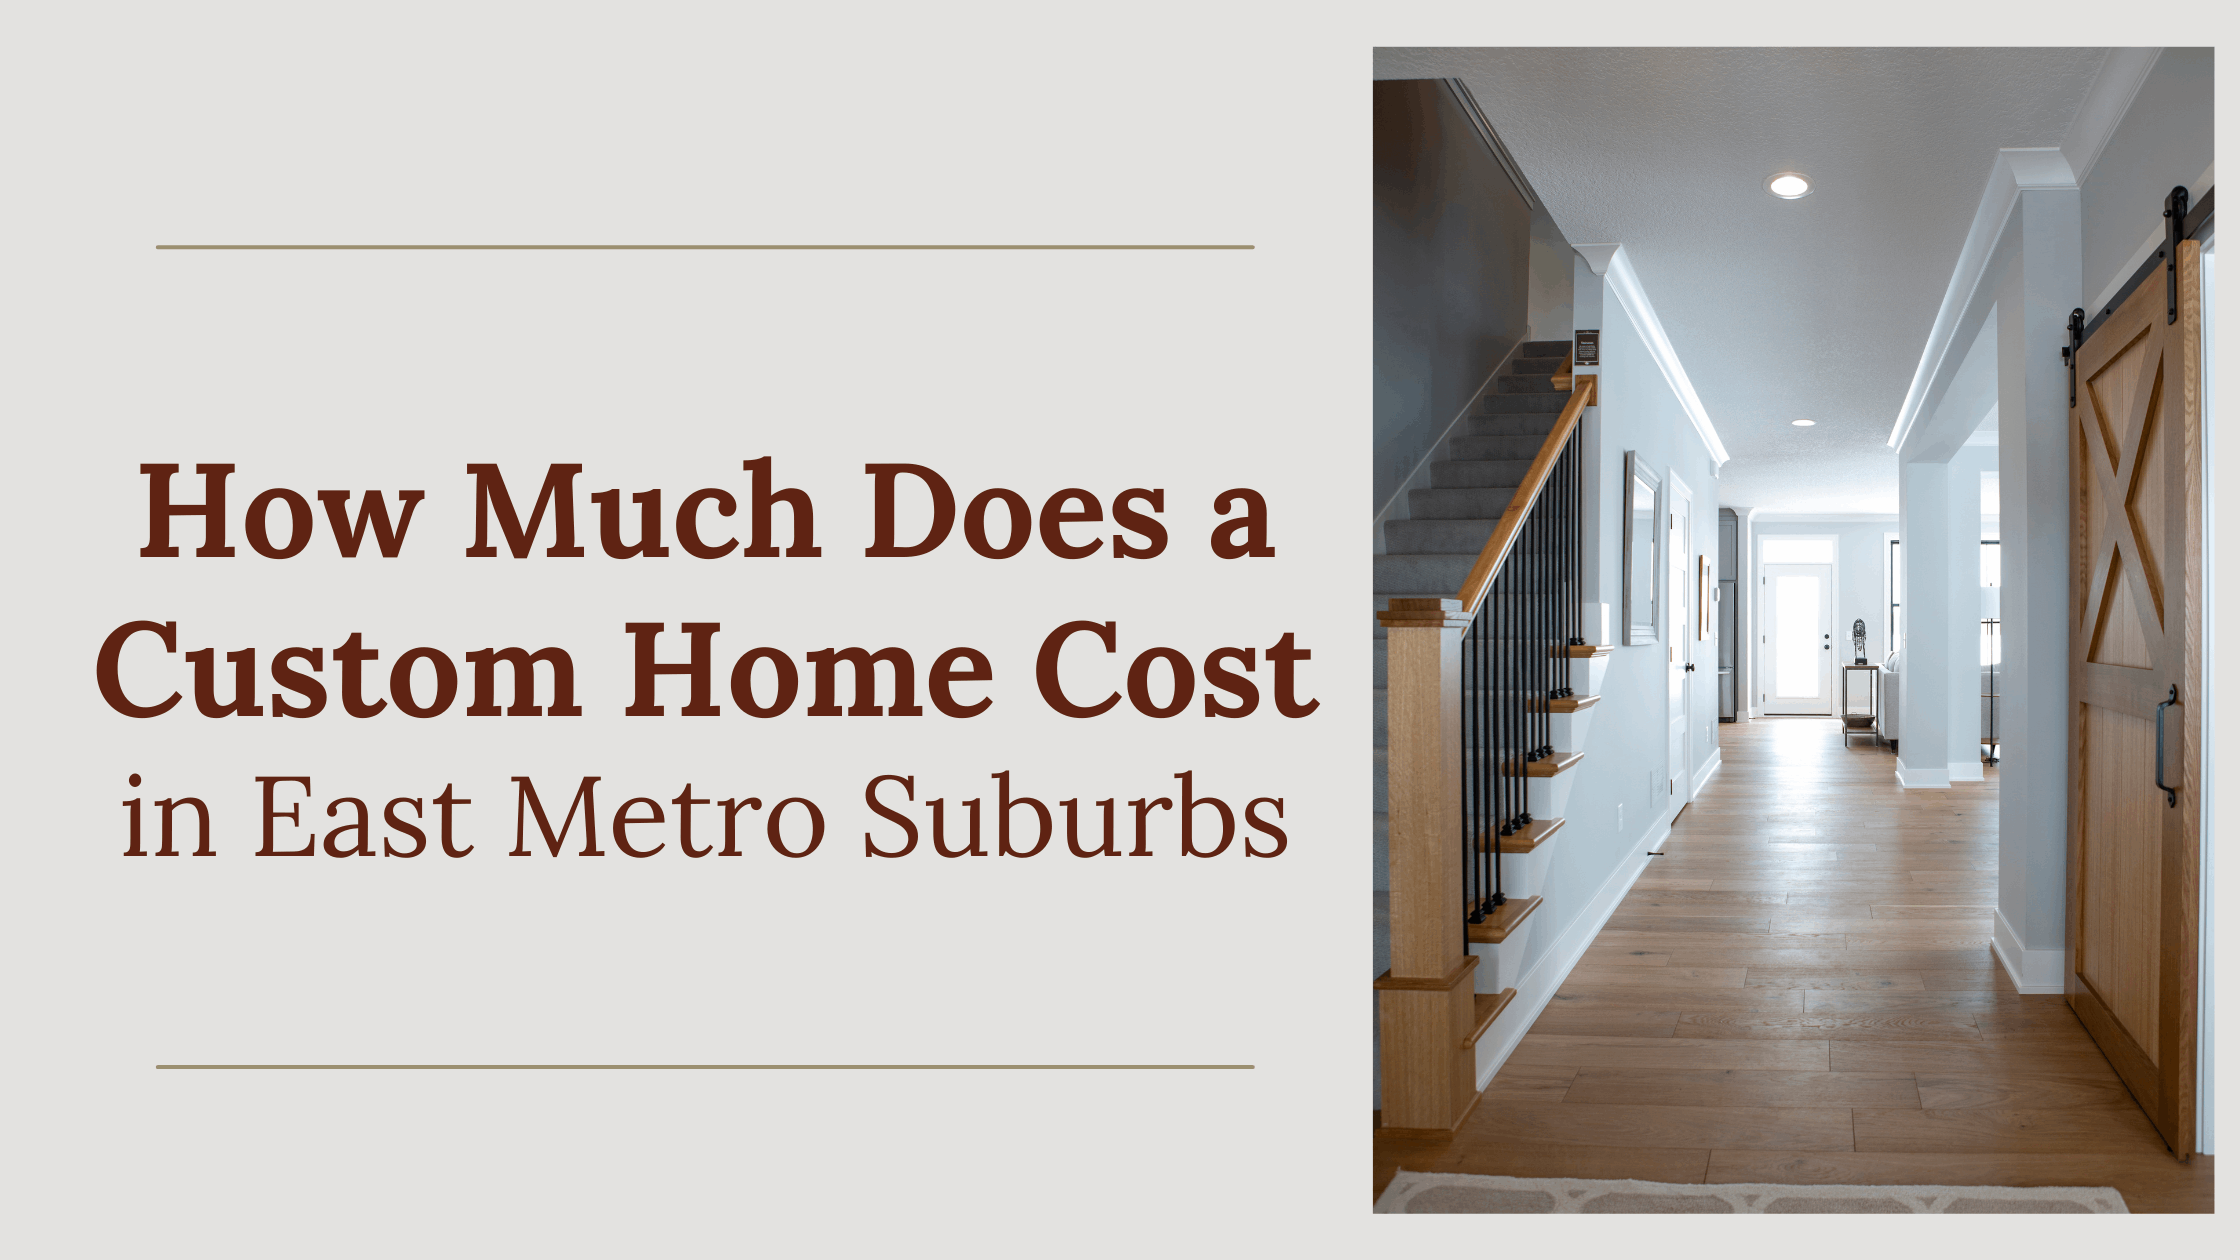 How Much Does a Custom Home Cost in the East Metro Suburbs?